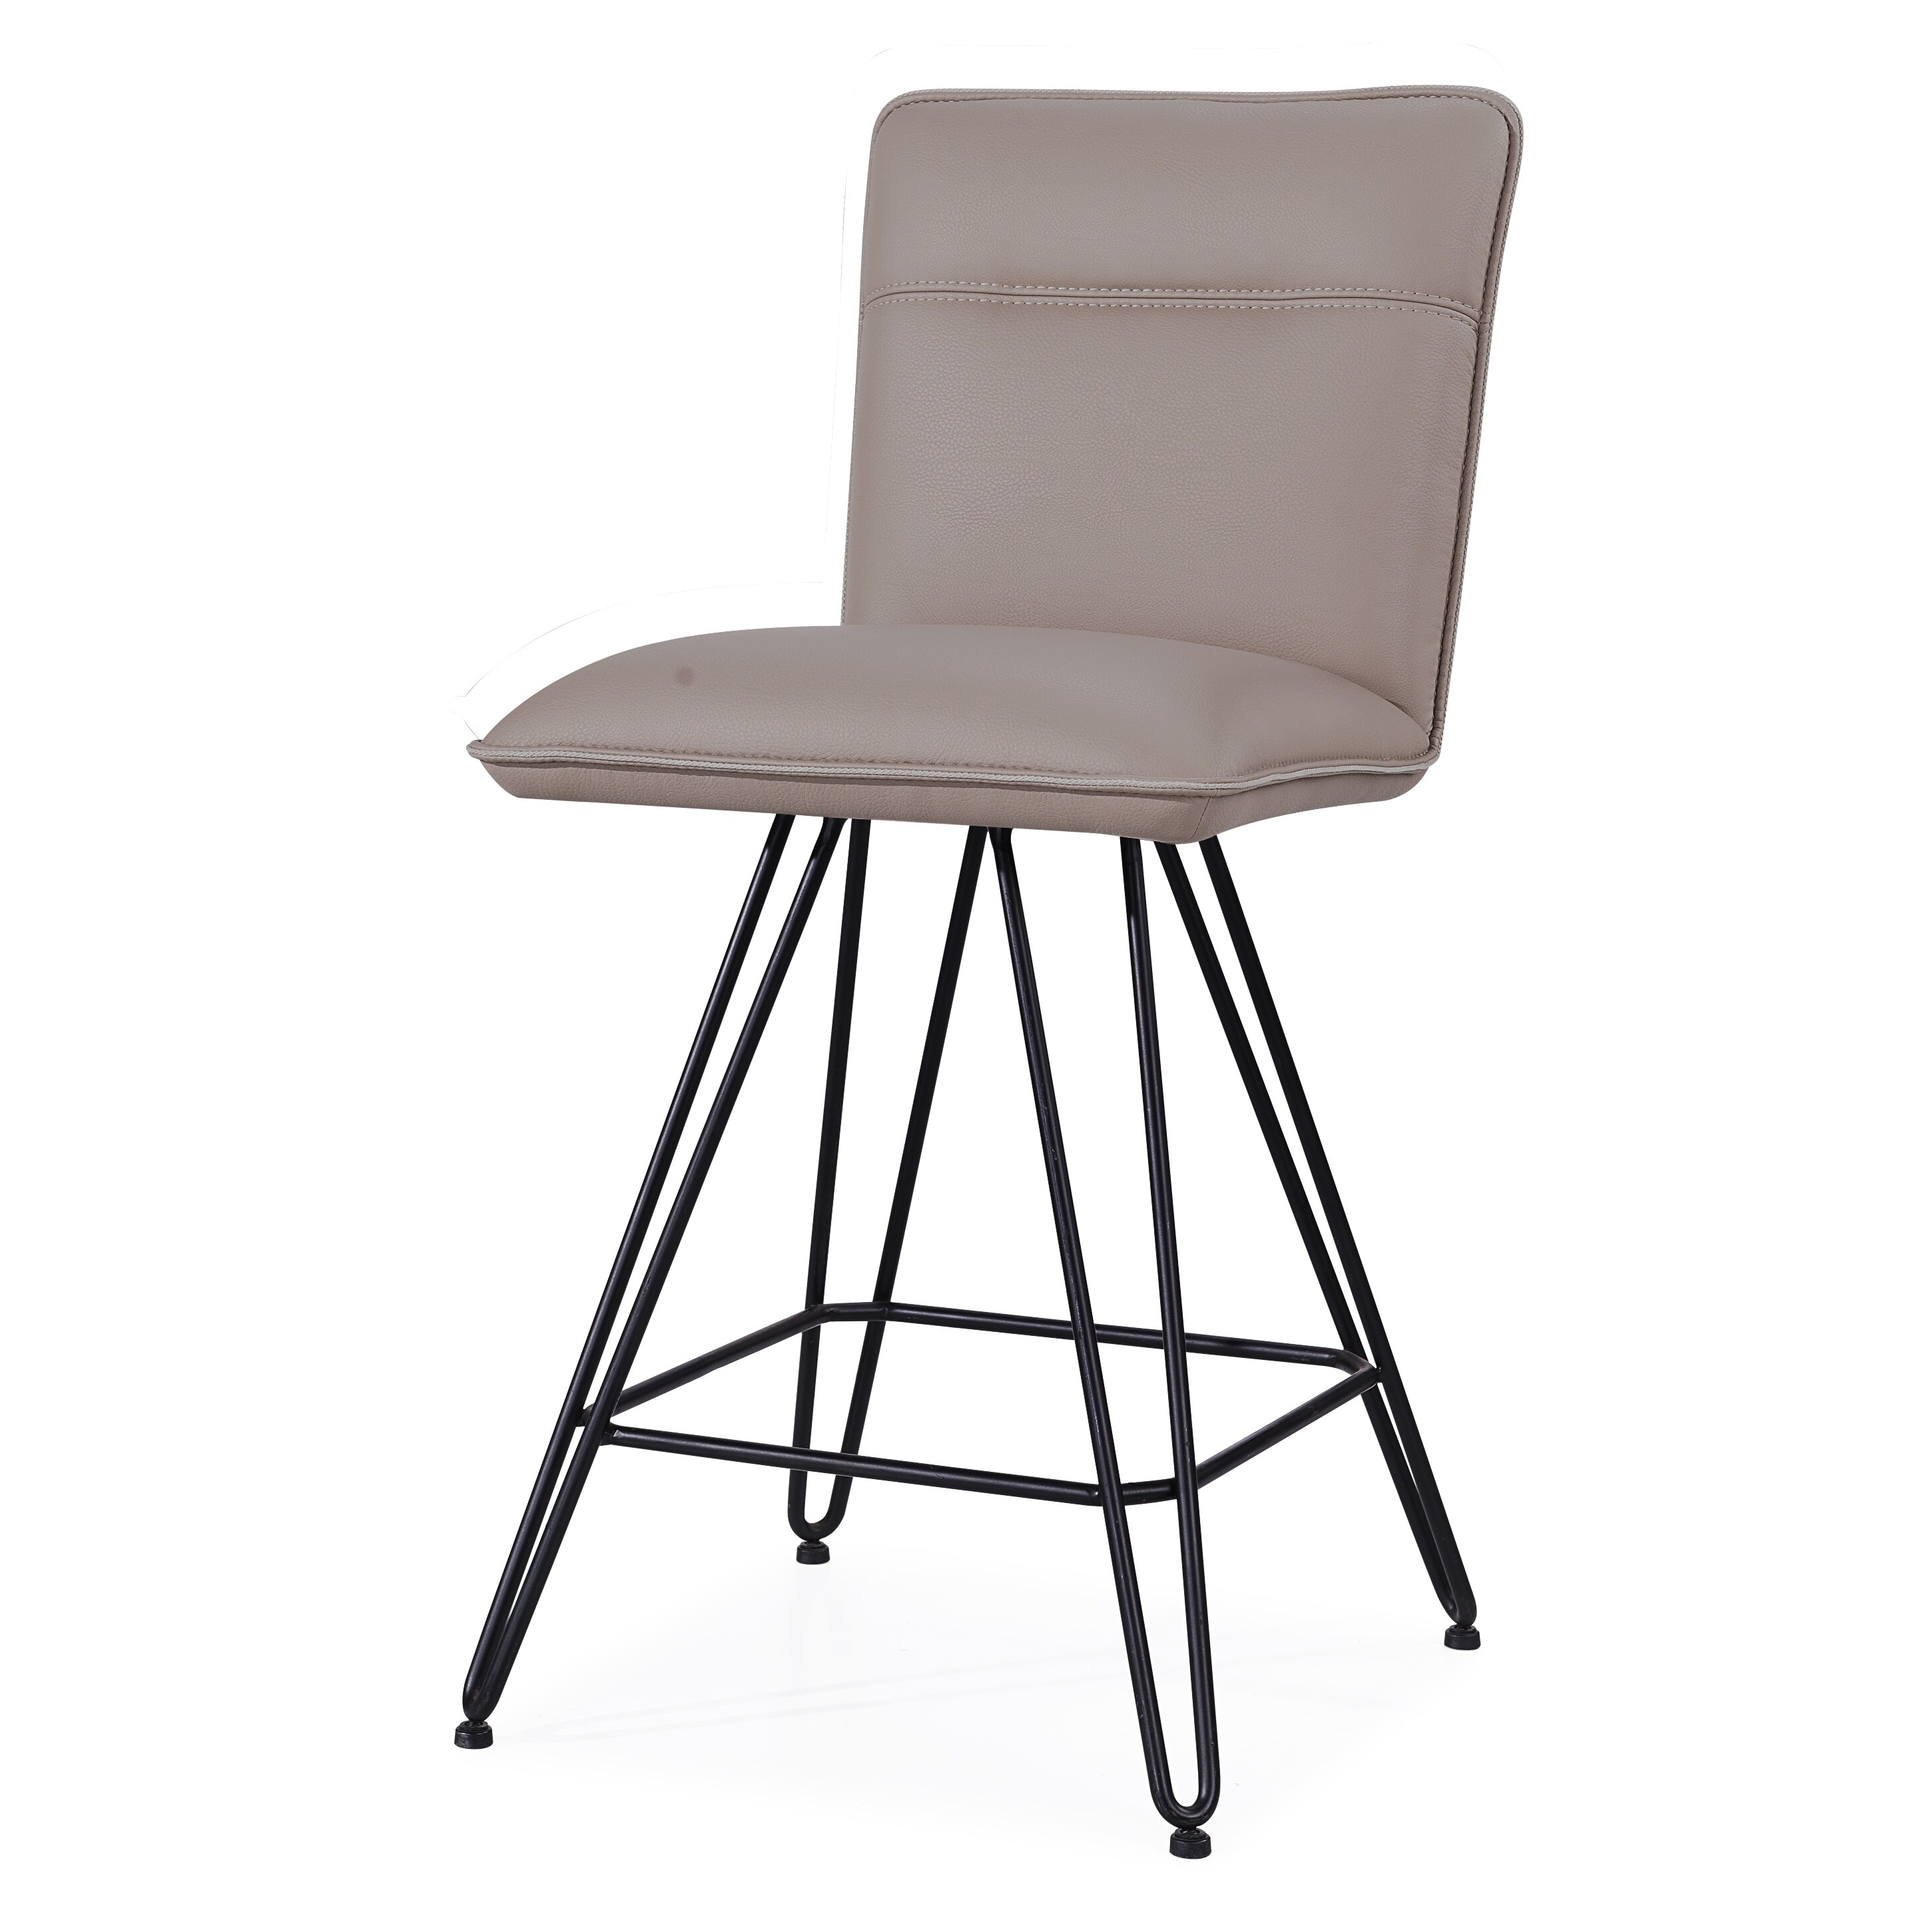 Leather Counter Height Stool with Metal Hairpin Legs, Set of 2, Taupe Brown and Black - 37 H x 18 W x 21 L Inches